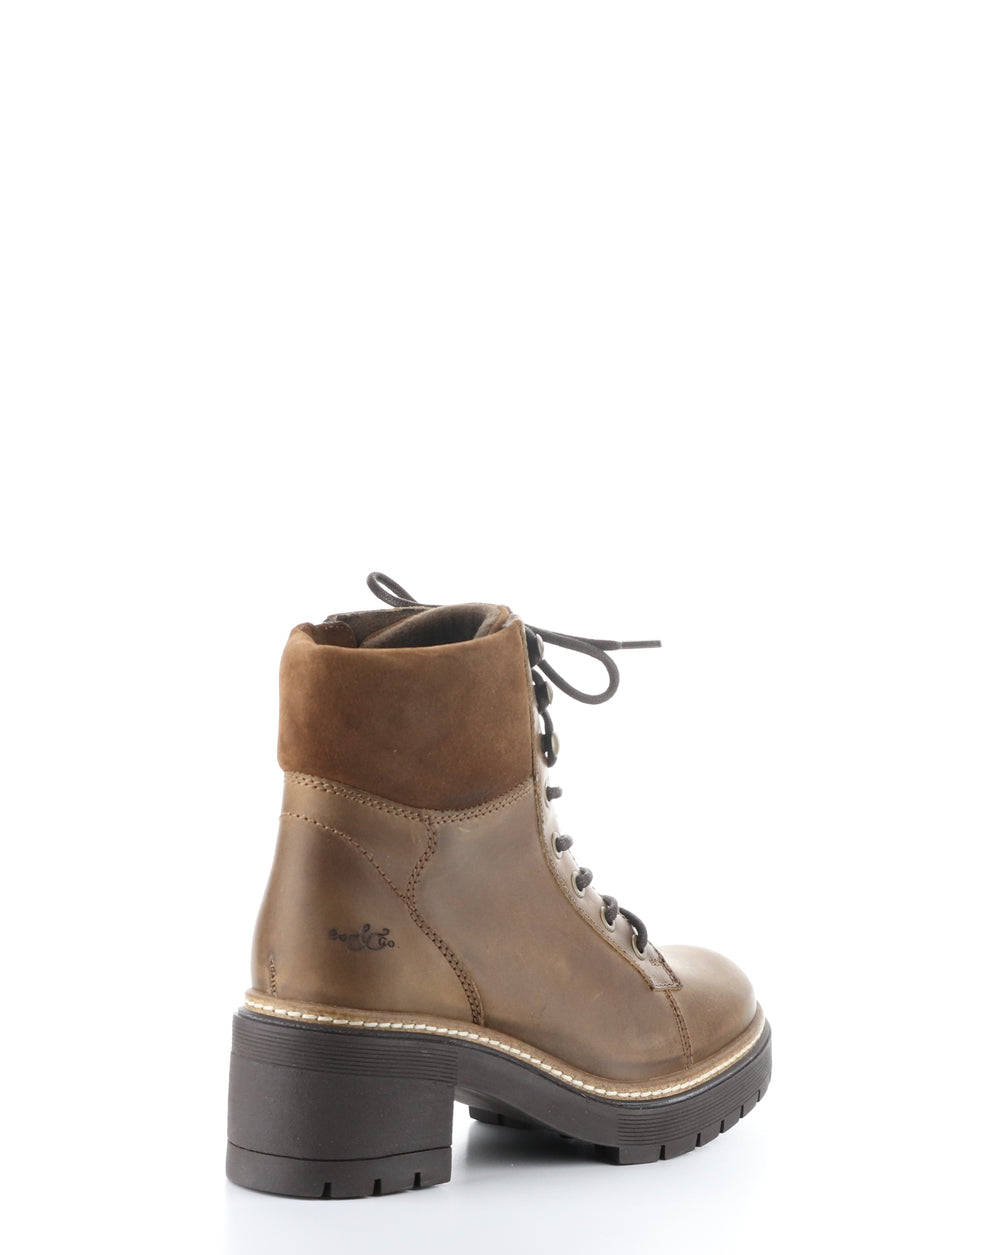 ZOA CAMEL/REDWOOD Round Toe Boots